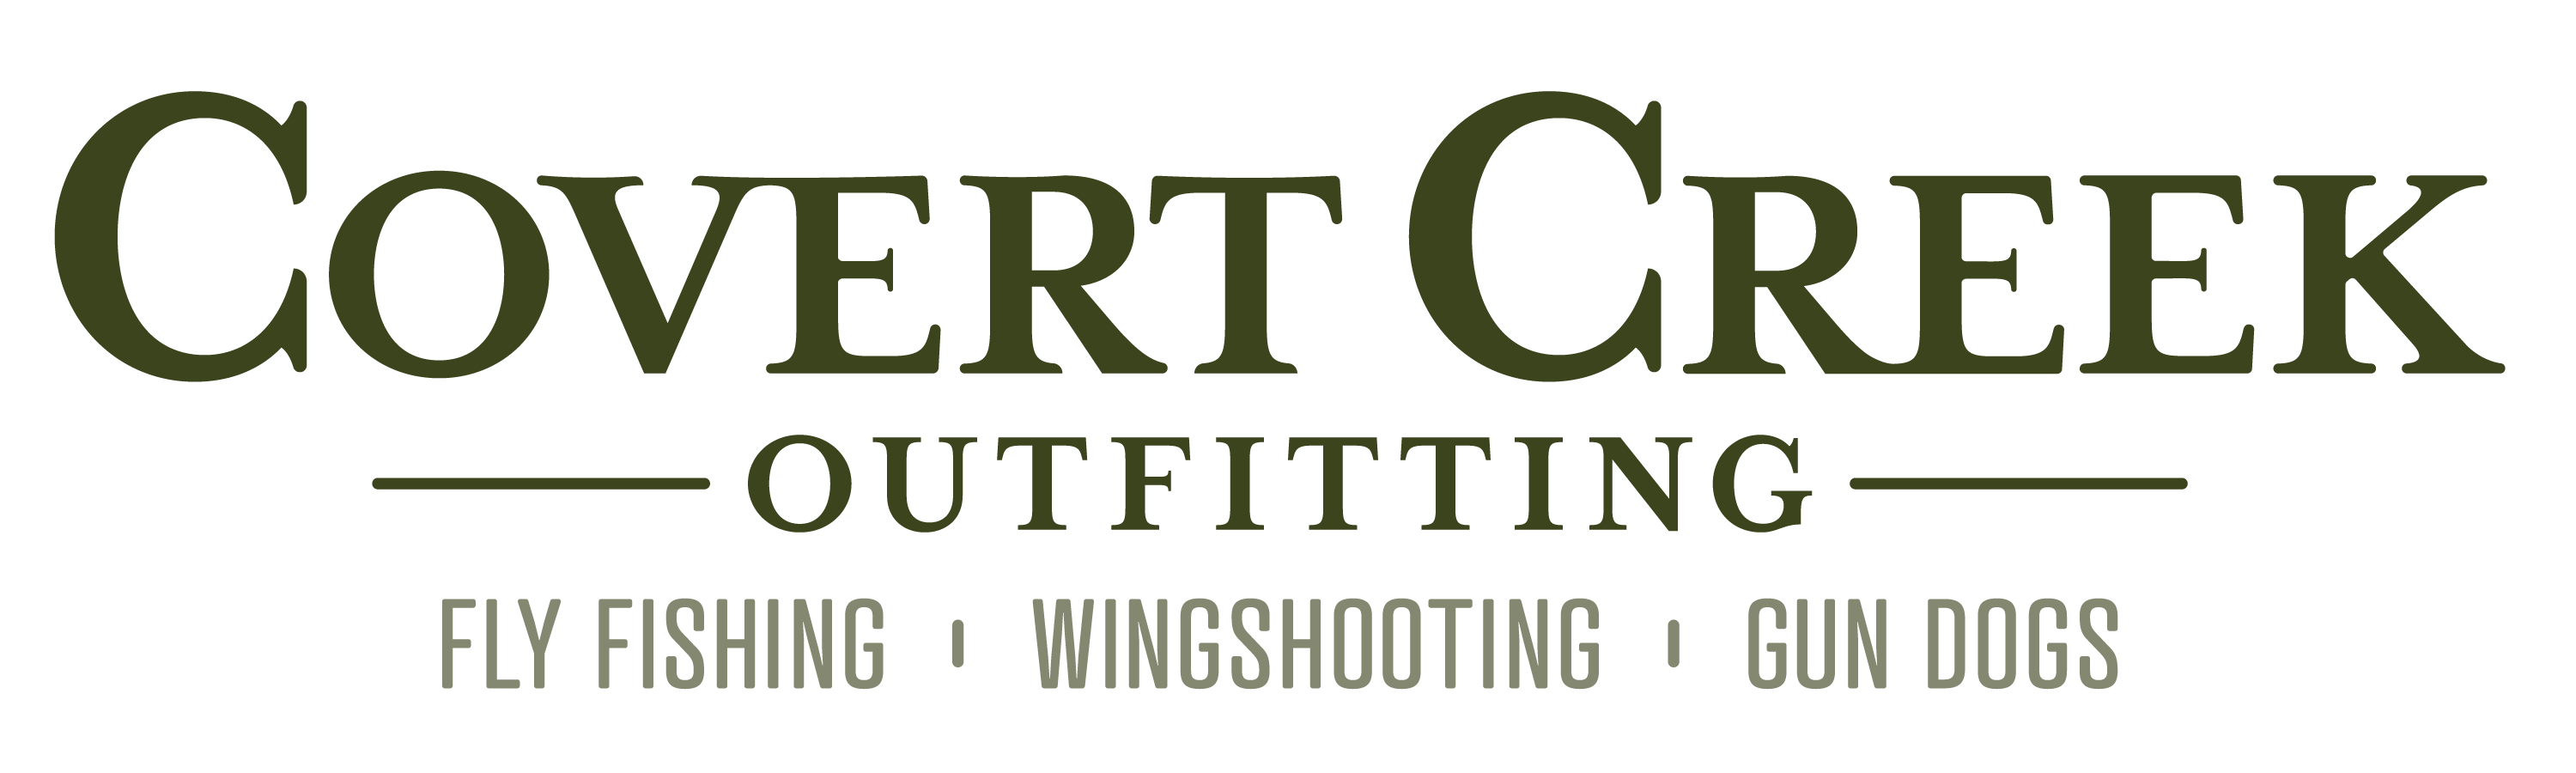 Fly Fishing & Wingshooting in the Catskill Mountains and Upstate New York